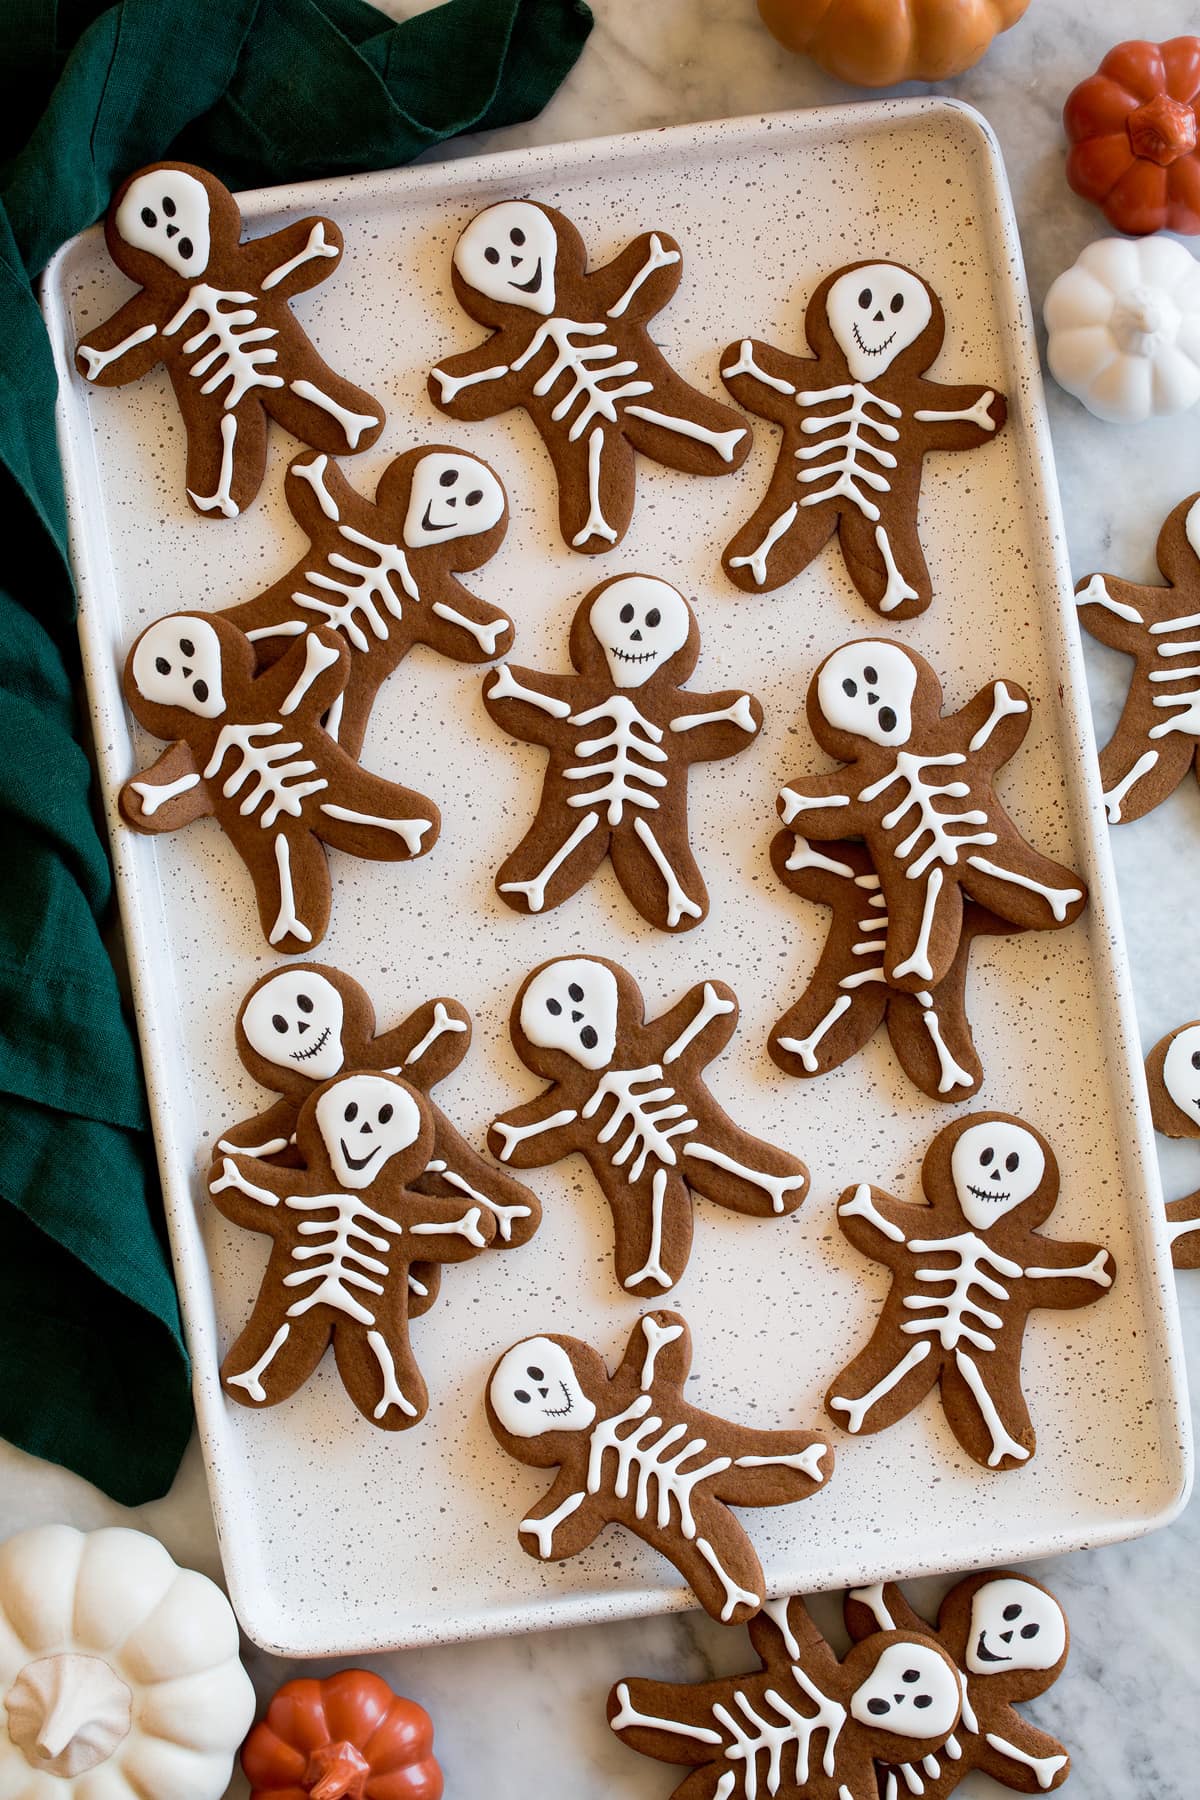 Skeleton gingerbread cookies on a white baking sheet with a green cloth and decorative pumpkins to the side.